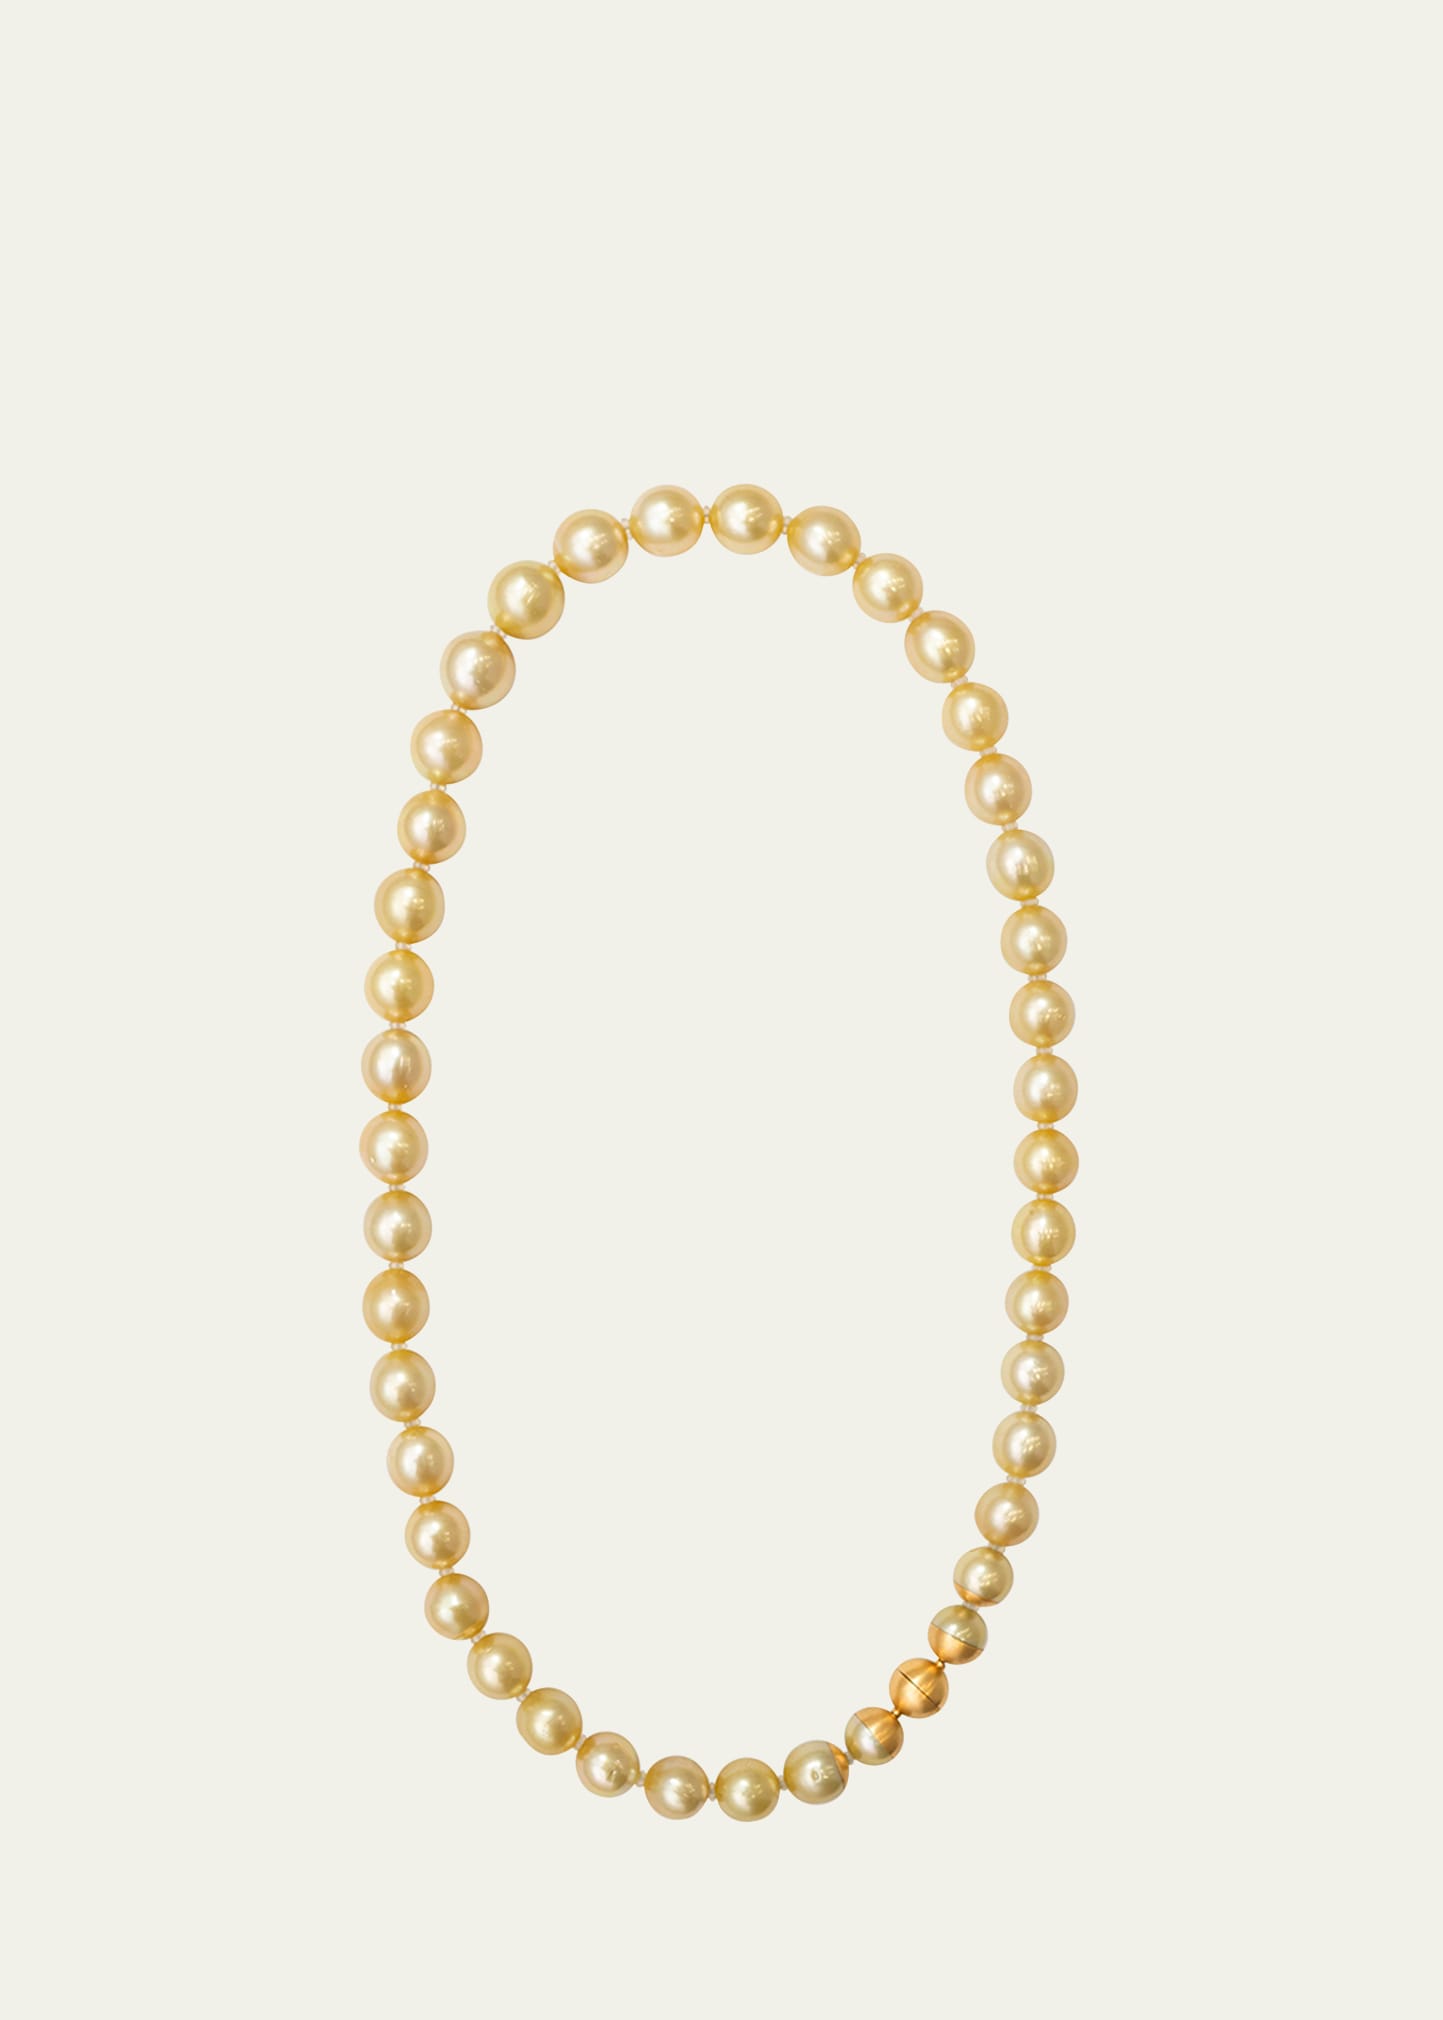 18K Yellow Gold Sectional Pearl Necklace with Golden Pearls, 17"L